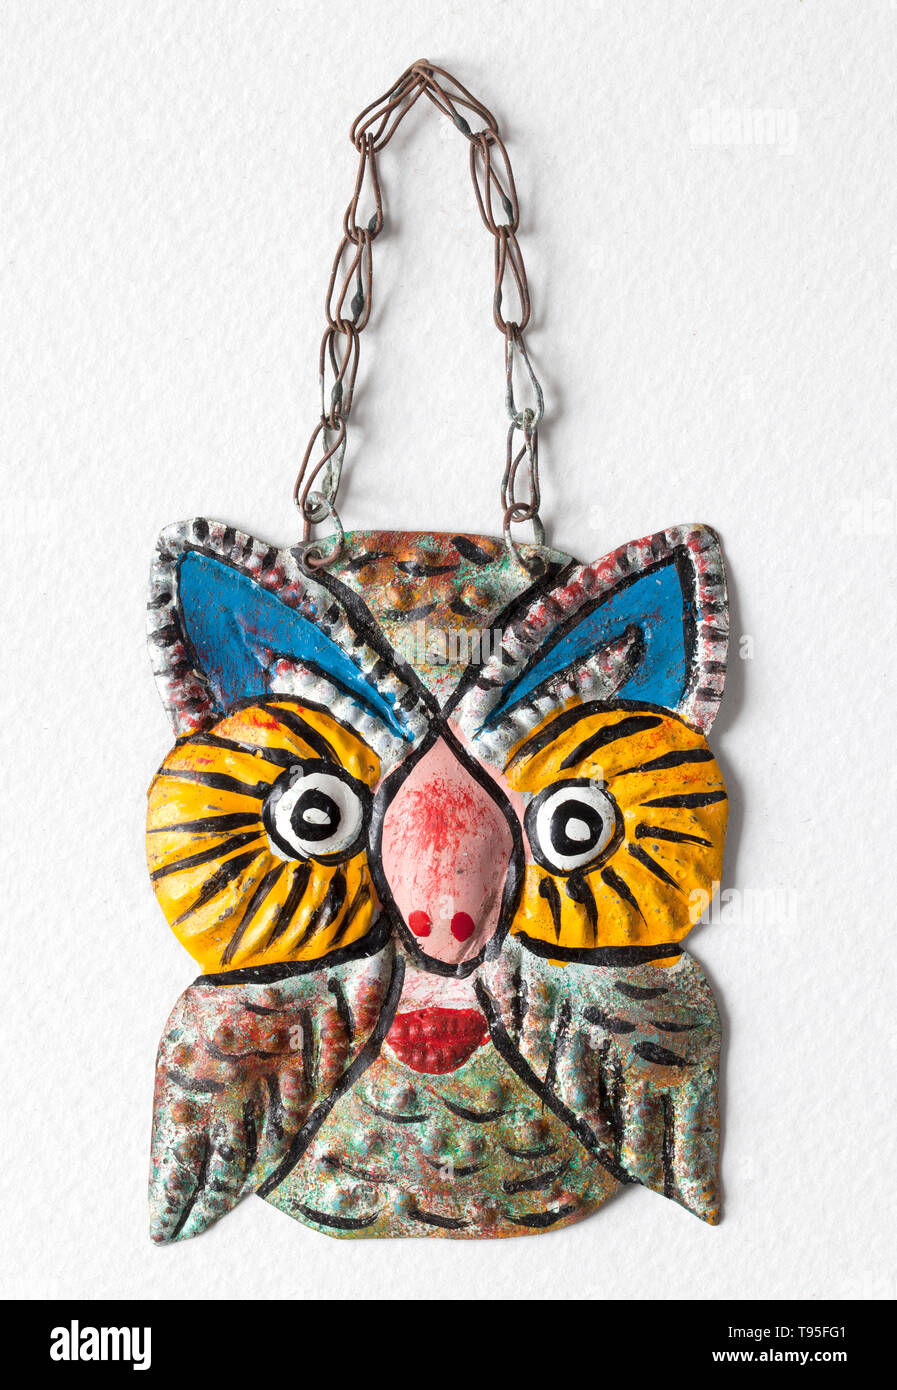 A Hand Painted Mexican Folk Art Owl Bottle Label Stock Photo